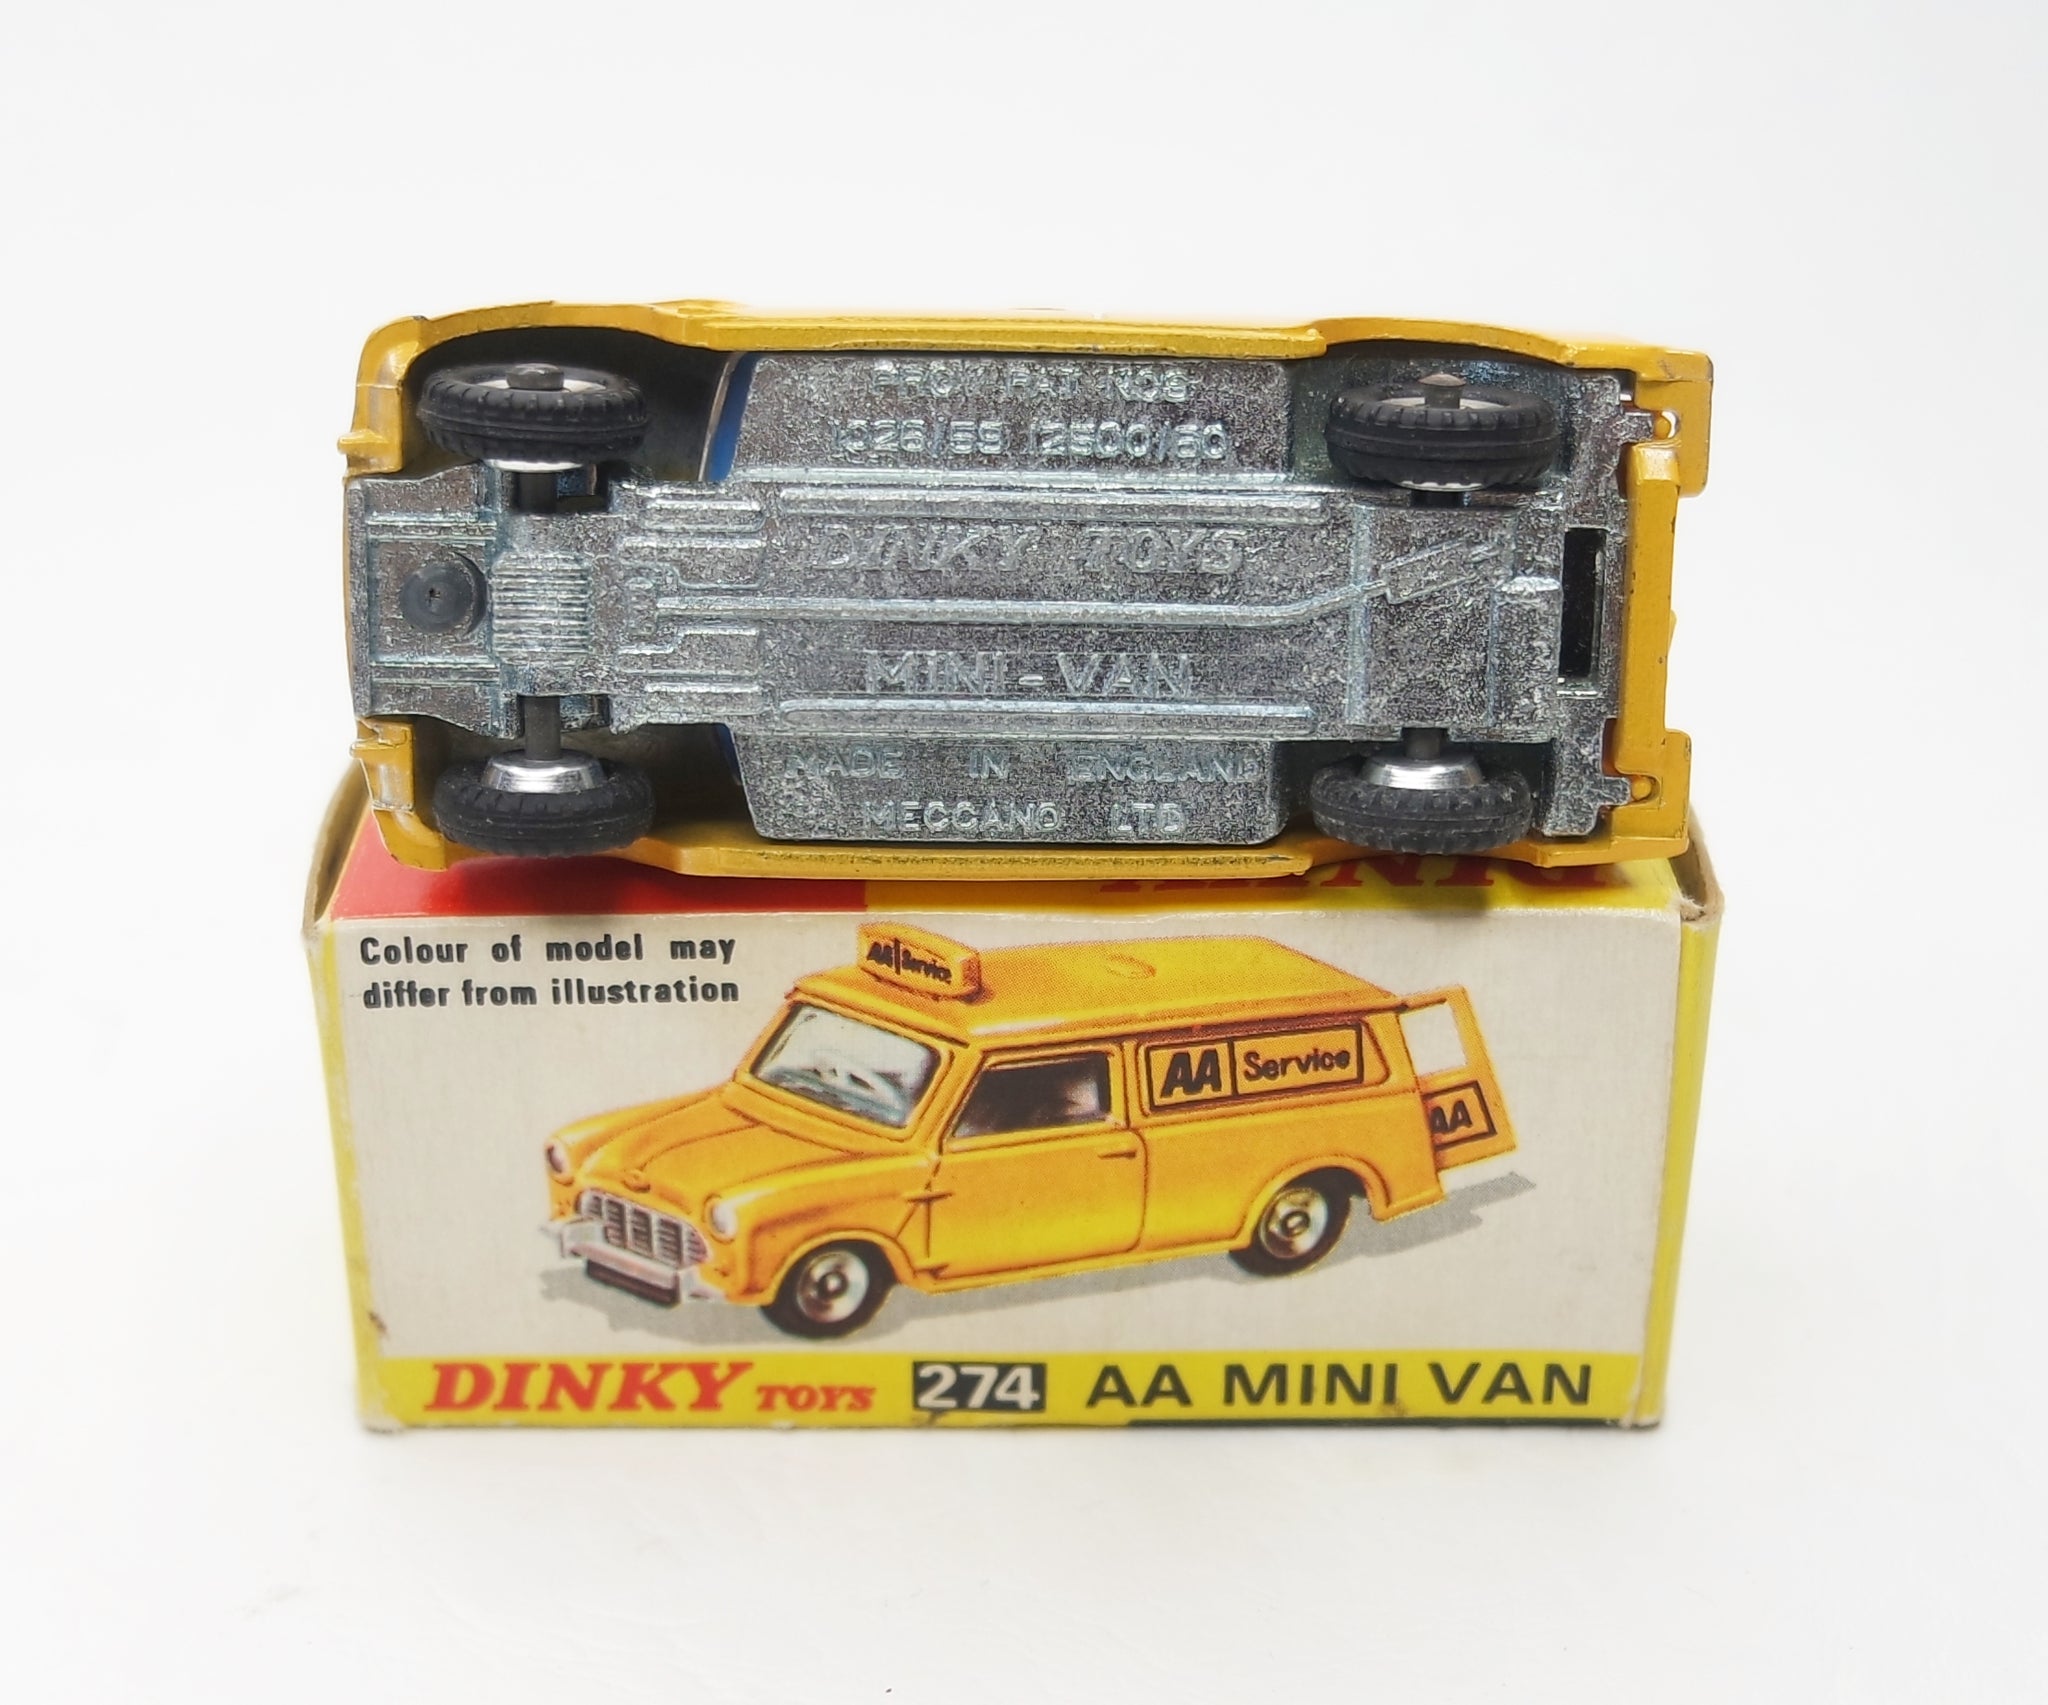 Dinky toy van fetches £6,400 in furious bidding at auction, Toys